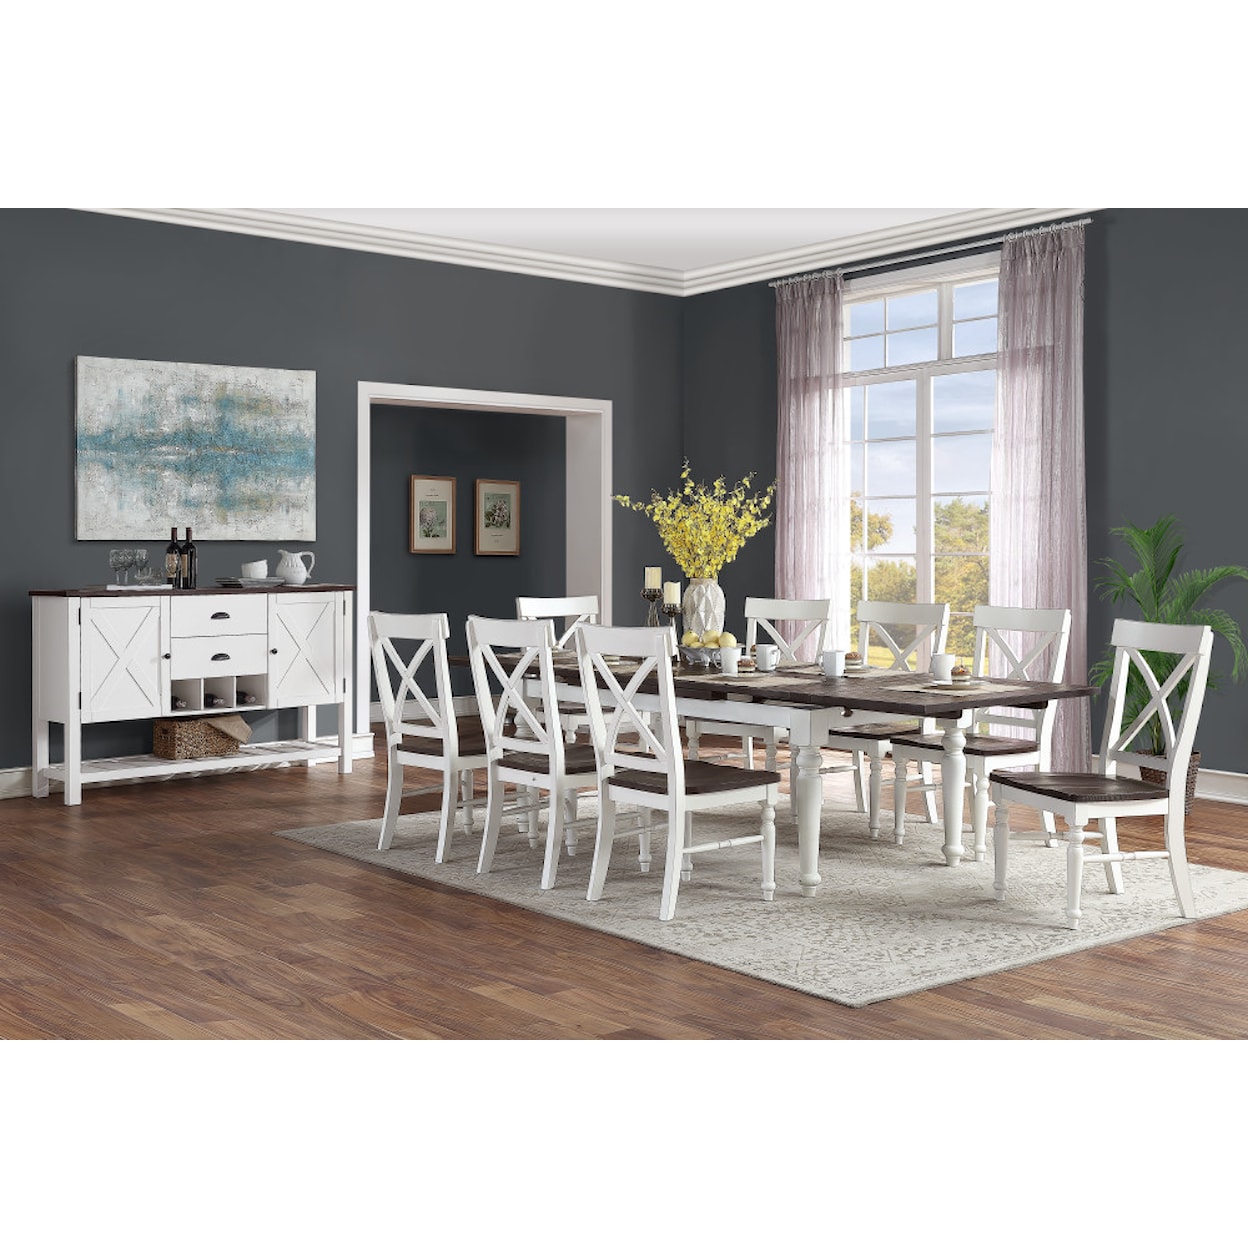 Emerald Mountain Retreat Dining Table with Two Leaves